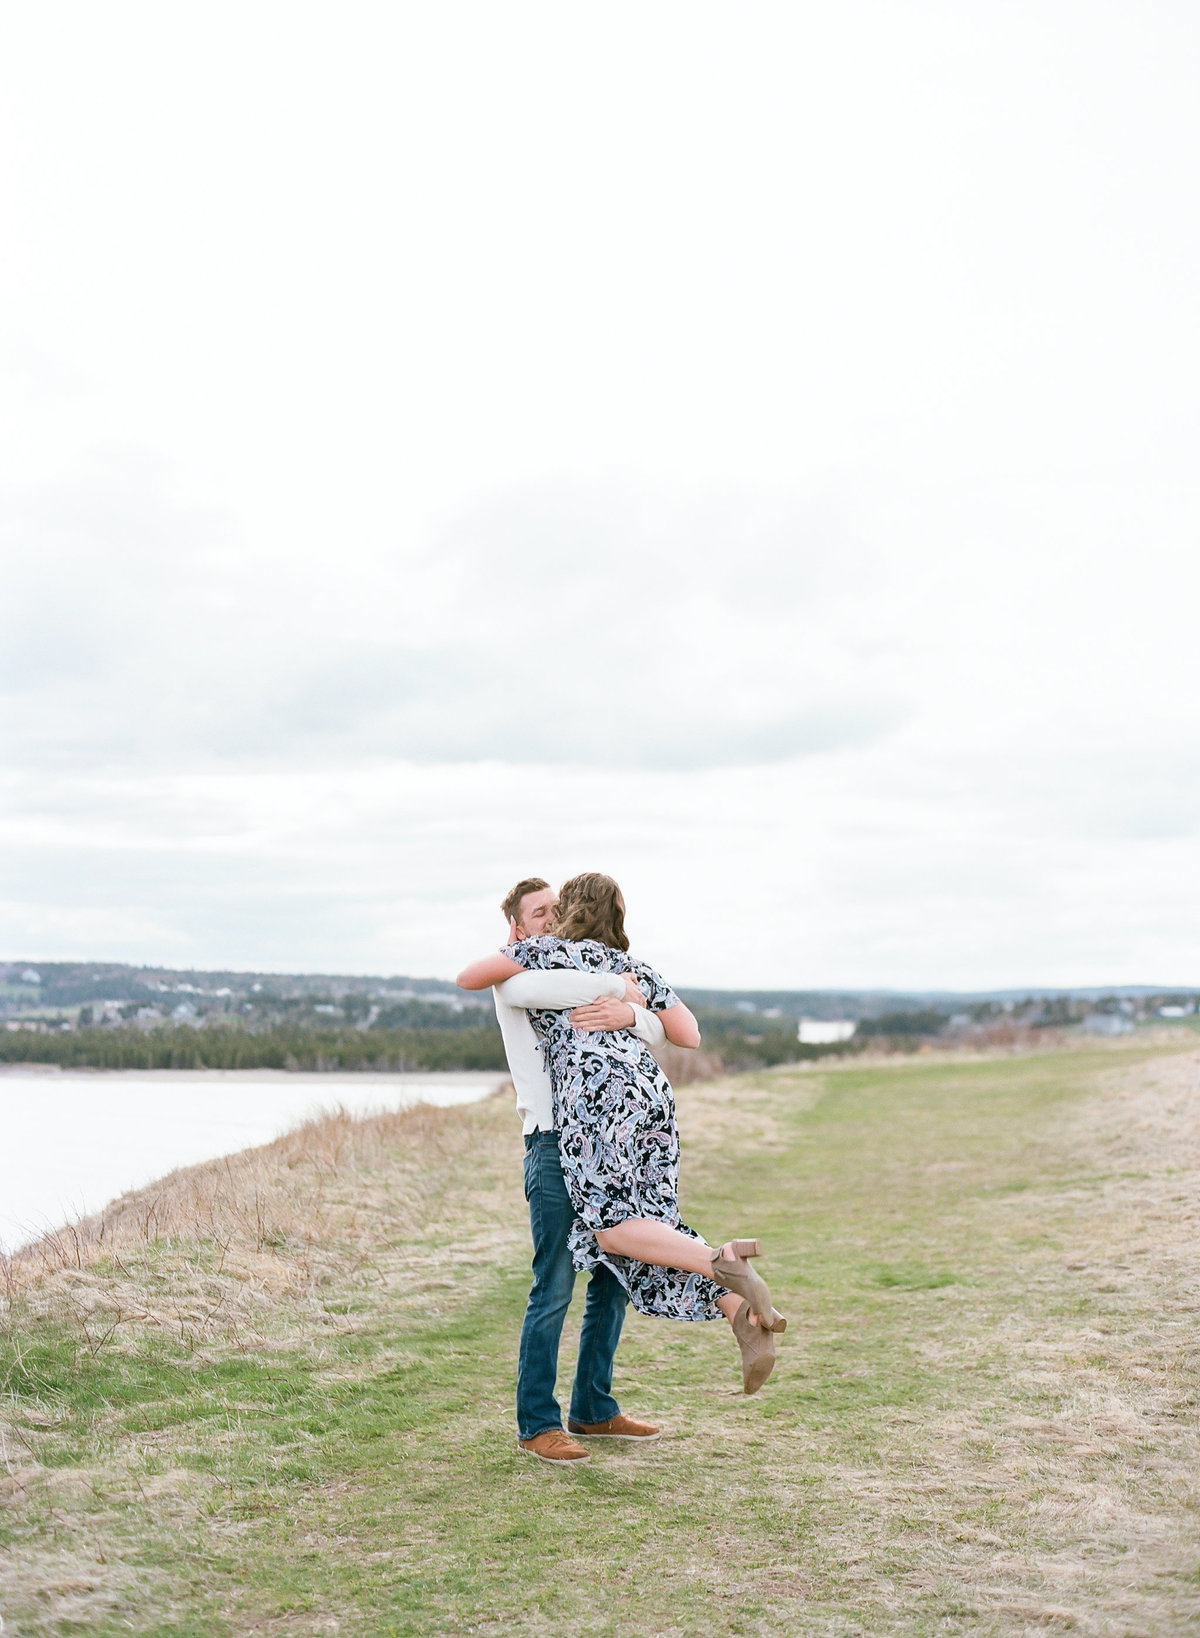 Jacqueline Anne Photography - Akayla and Andrew - Lawrencetown Beach-53